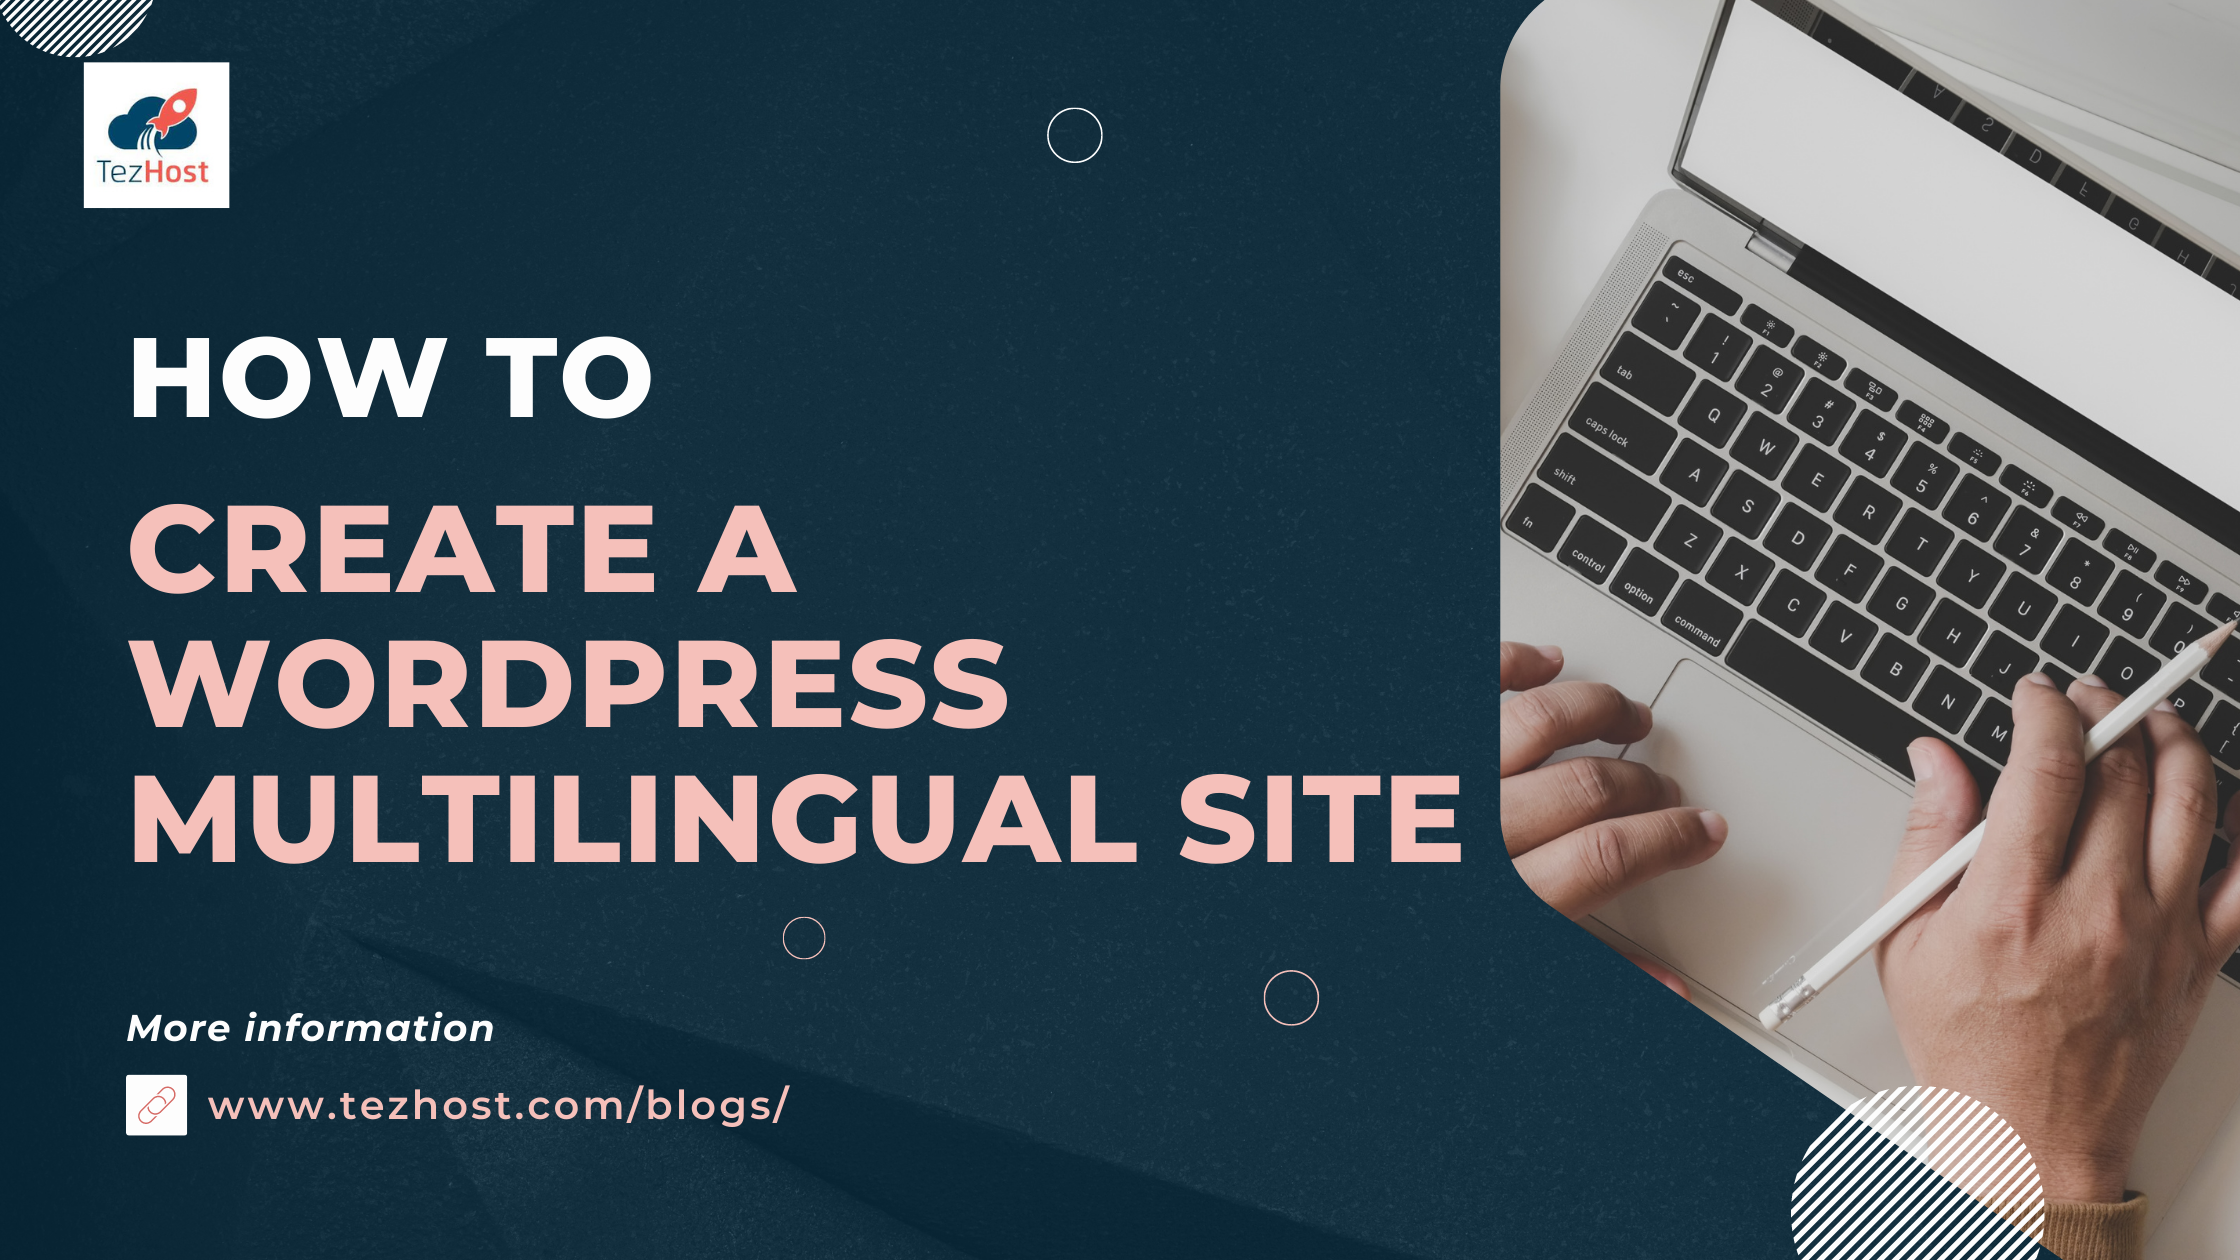 How to Create a WordPress Multilingual Site